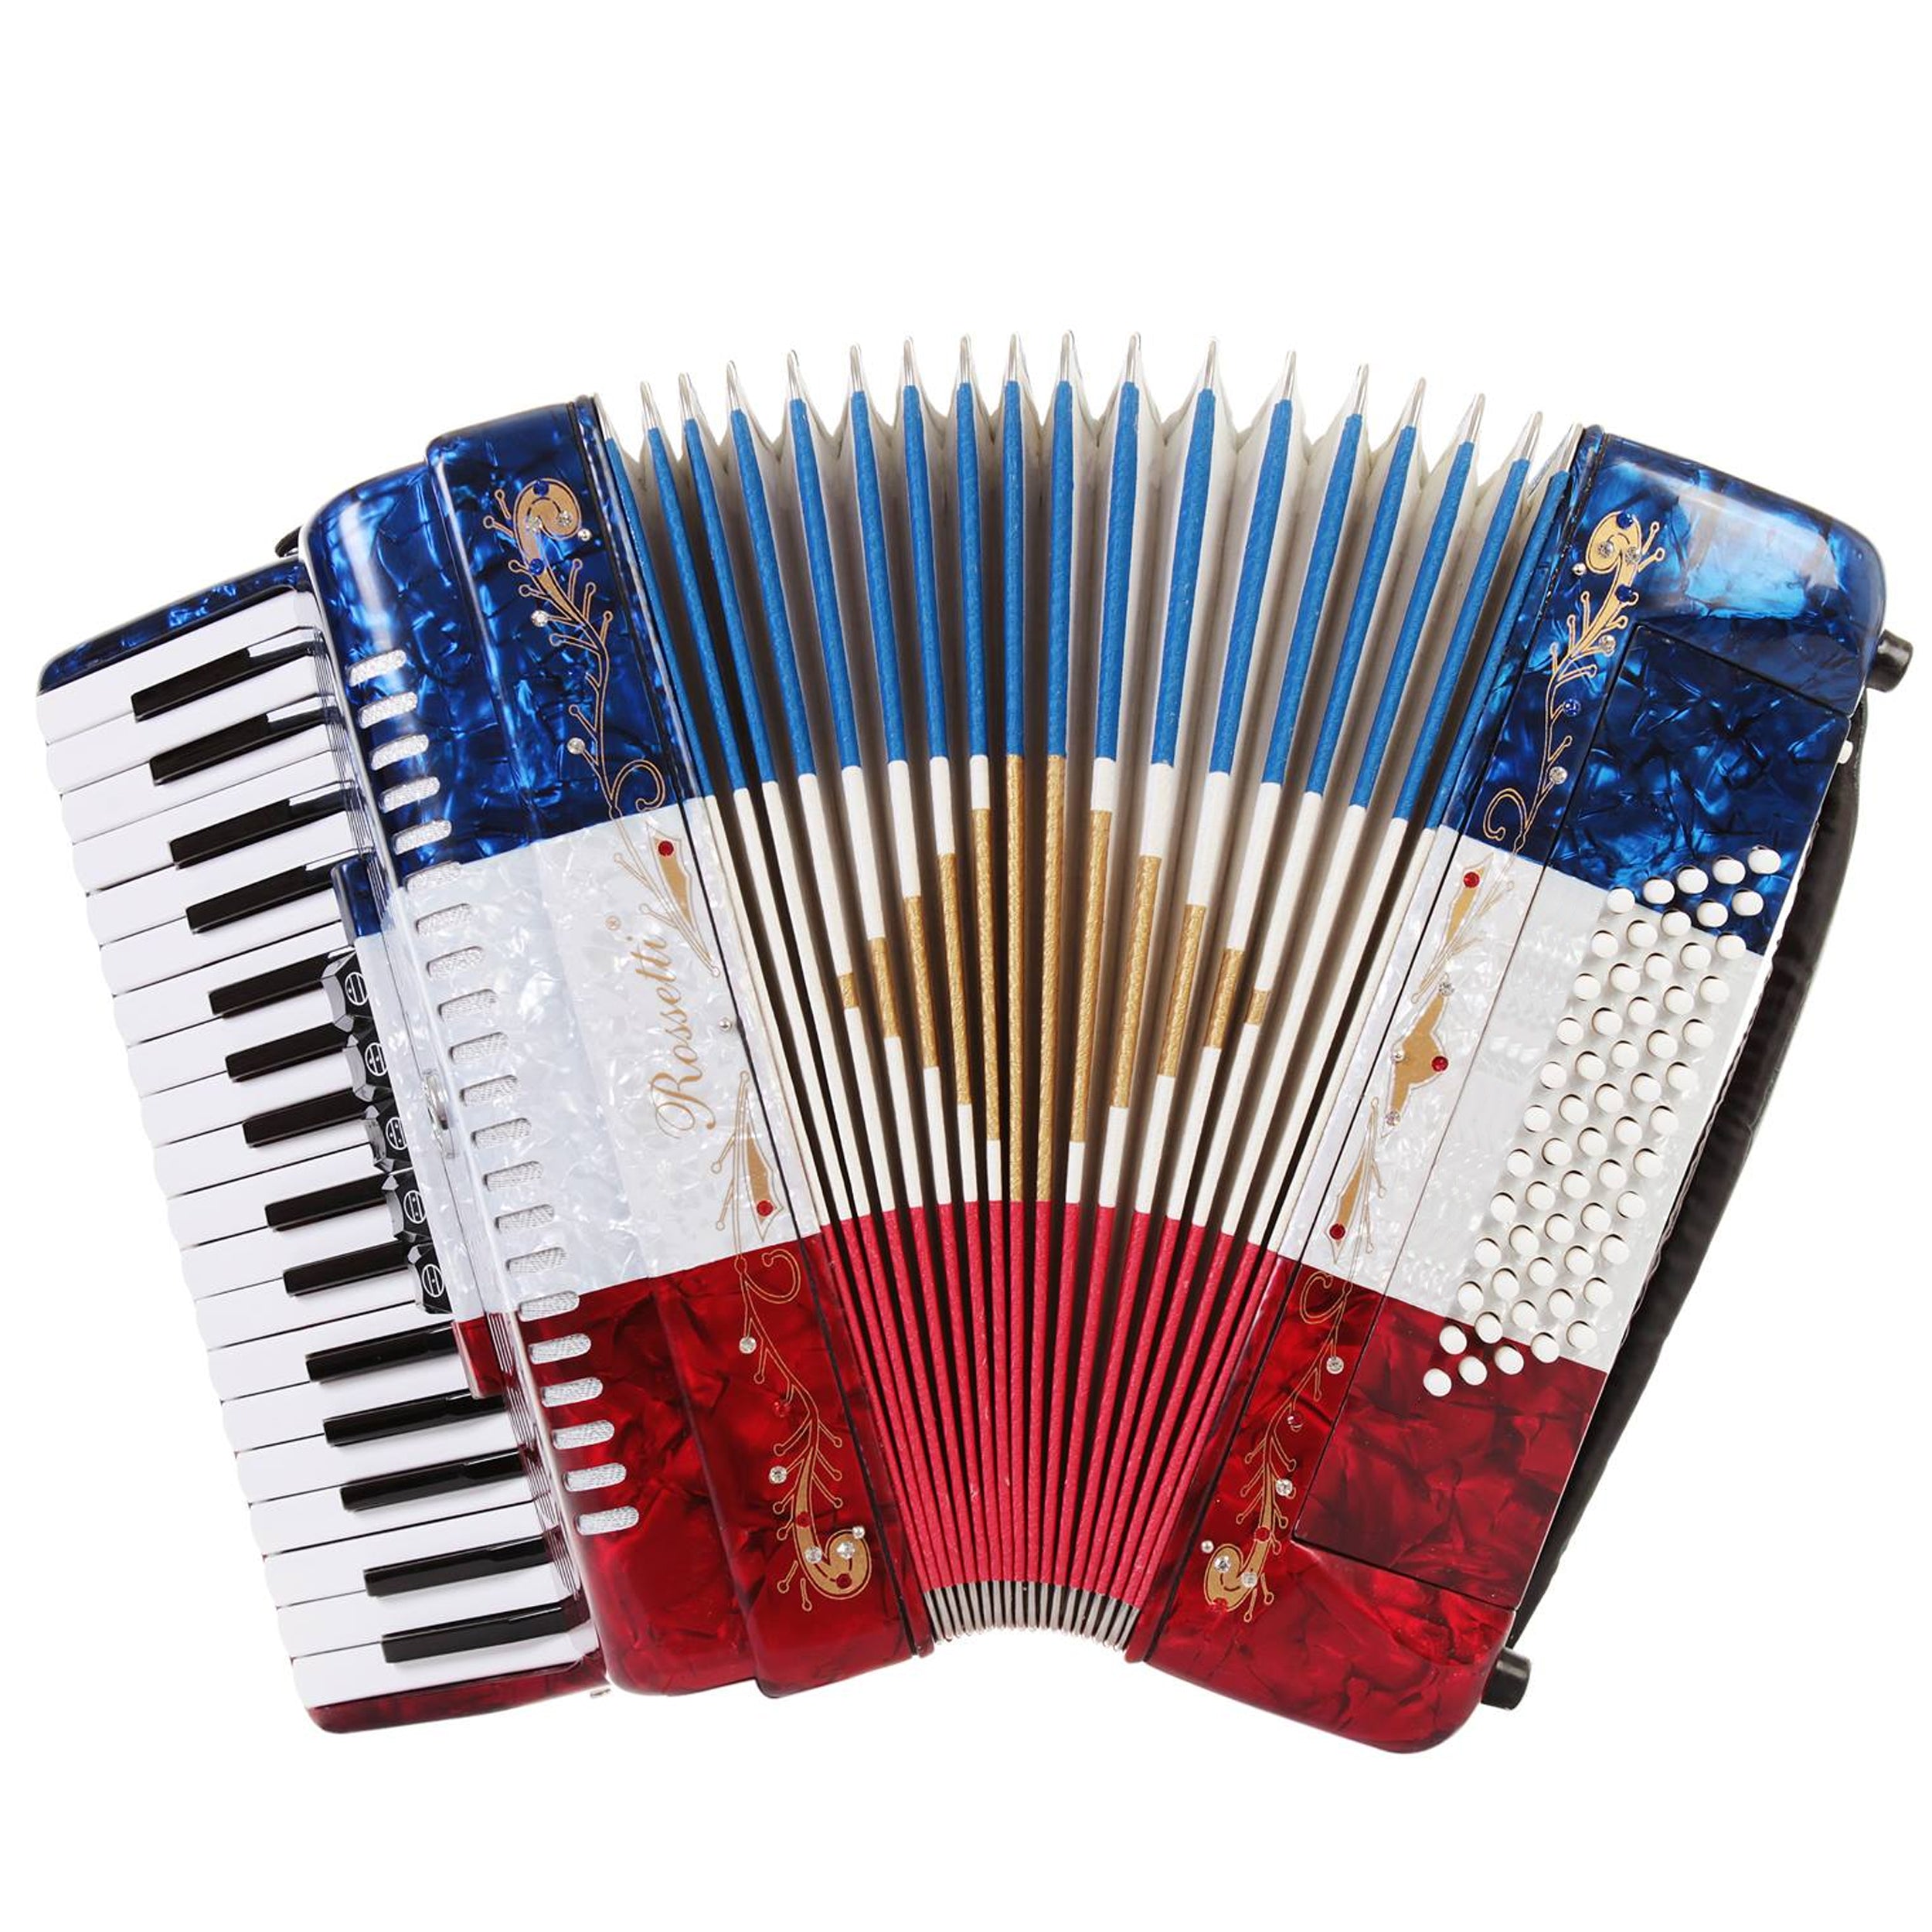 Rossetti Piano Accordion 60 Bass 34 Keys 5 Switches US Flag